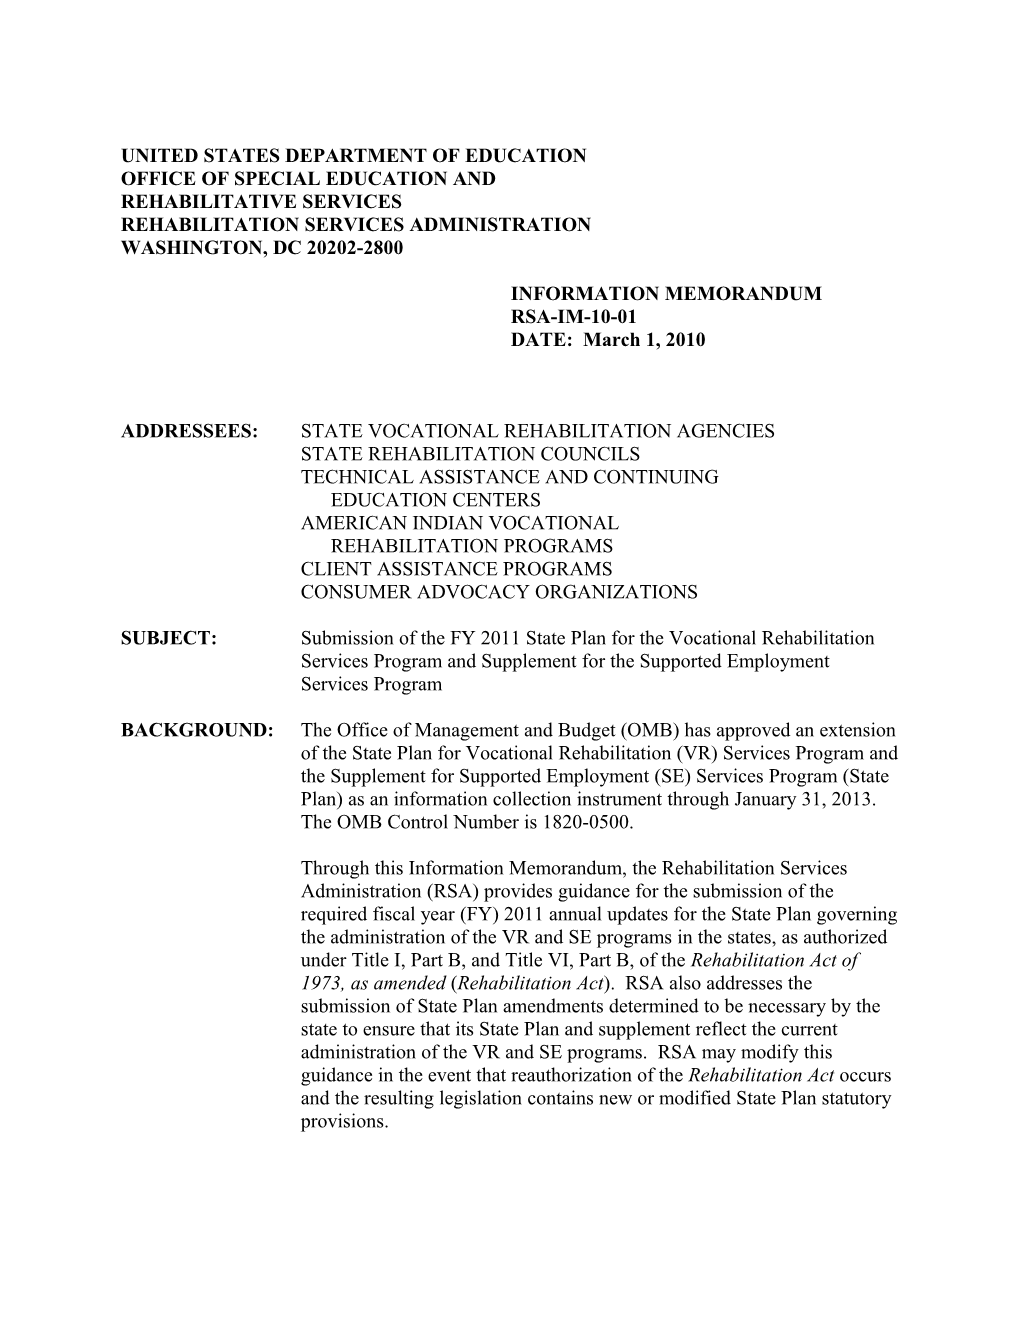 RSA-IM-10-01: Submission of the FY 2011 State Plan for the Vocational Rehabilitation Services